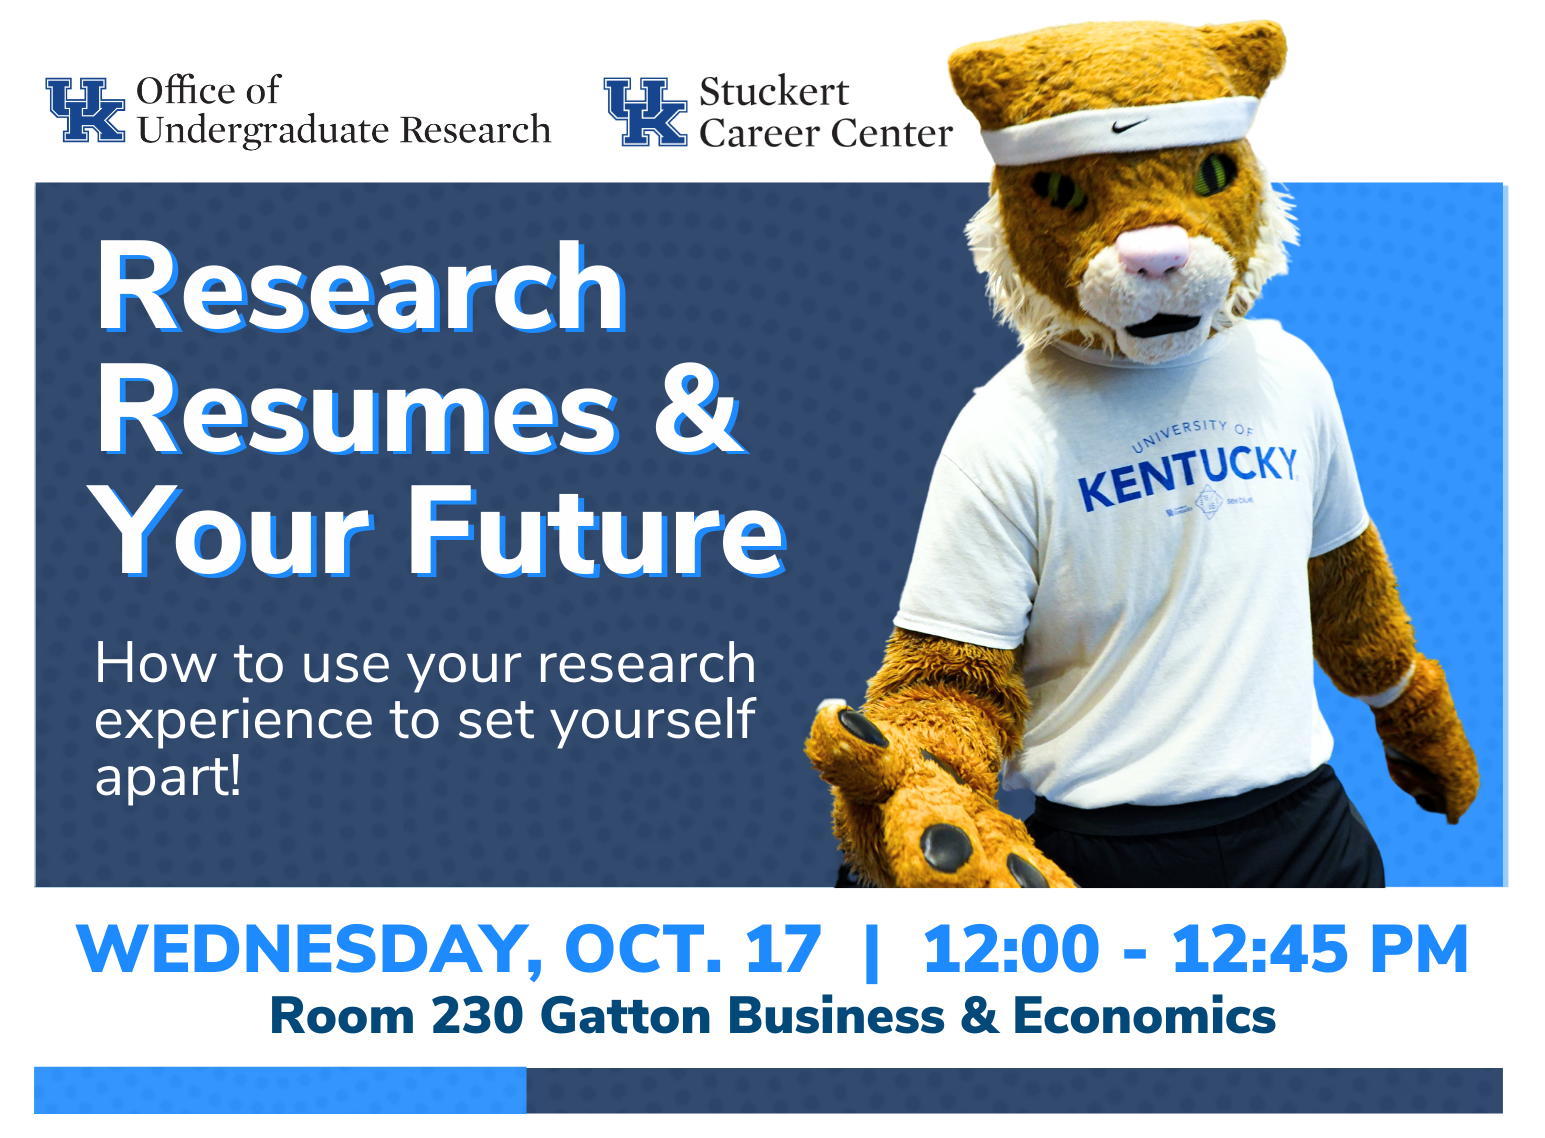 Research, Resumes & Your Future workshop